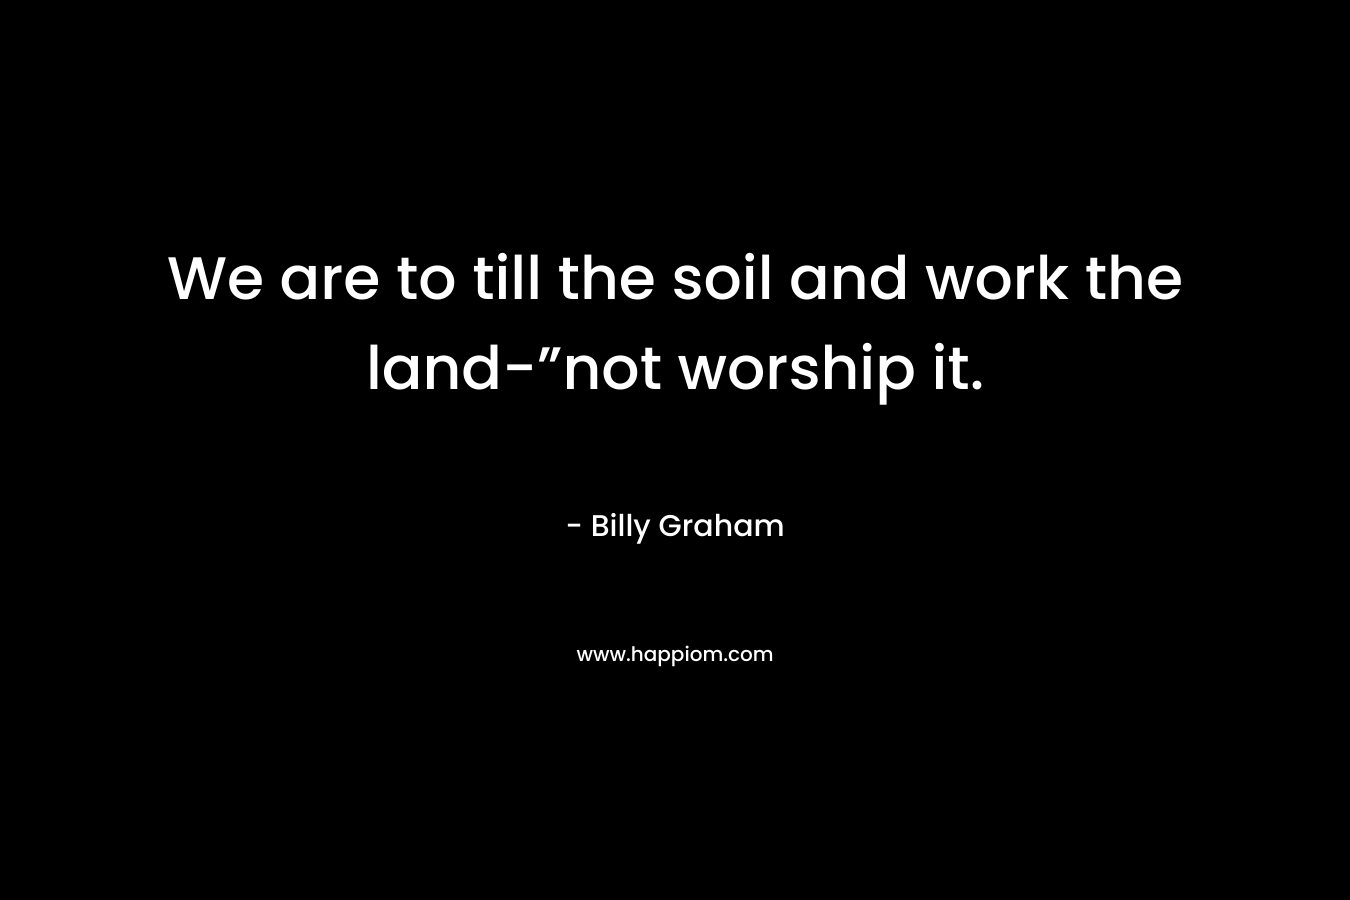 We are to till the soil and work the land-”not worship it.